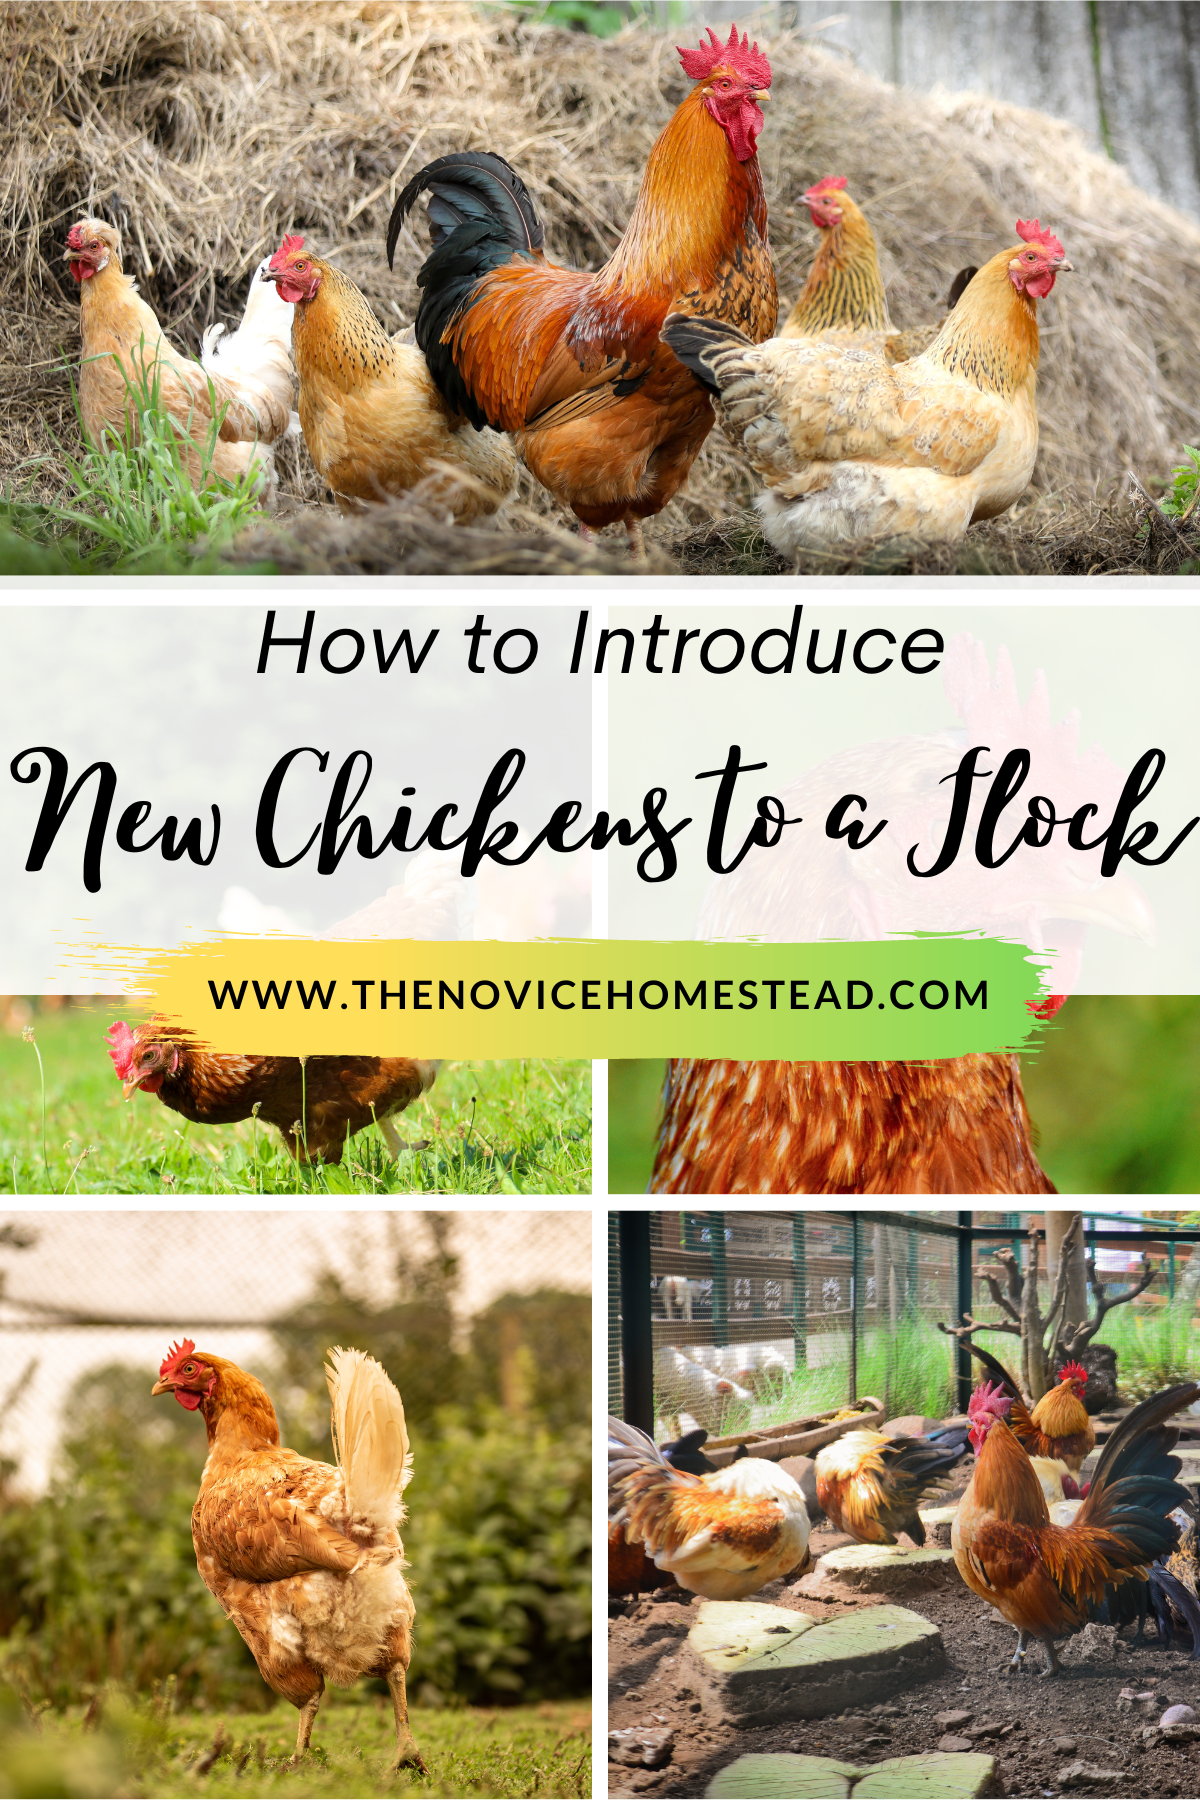 collage of chicken related photos with text overlay "How to Introduce New Chickens to a Flock"